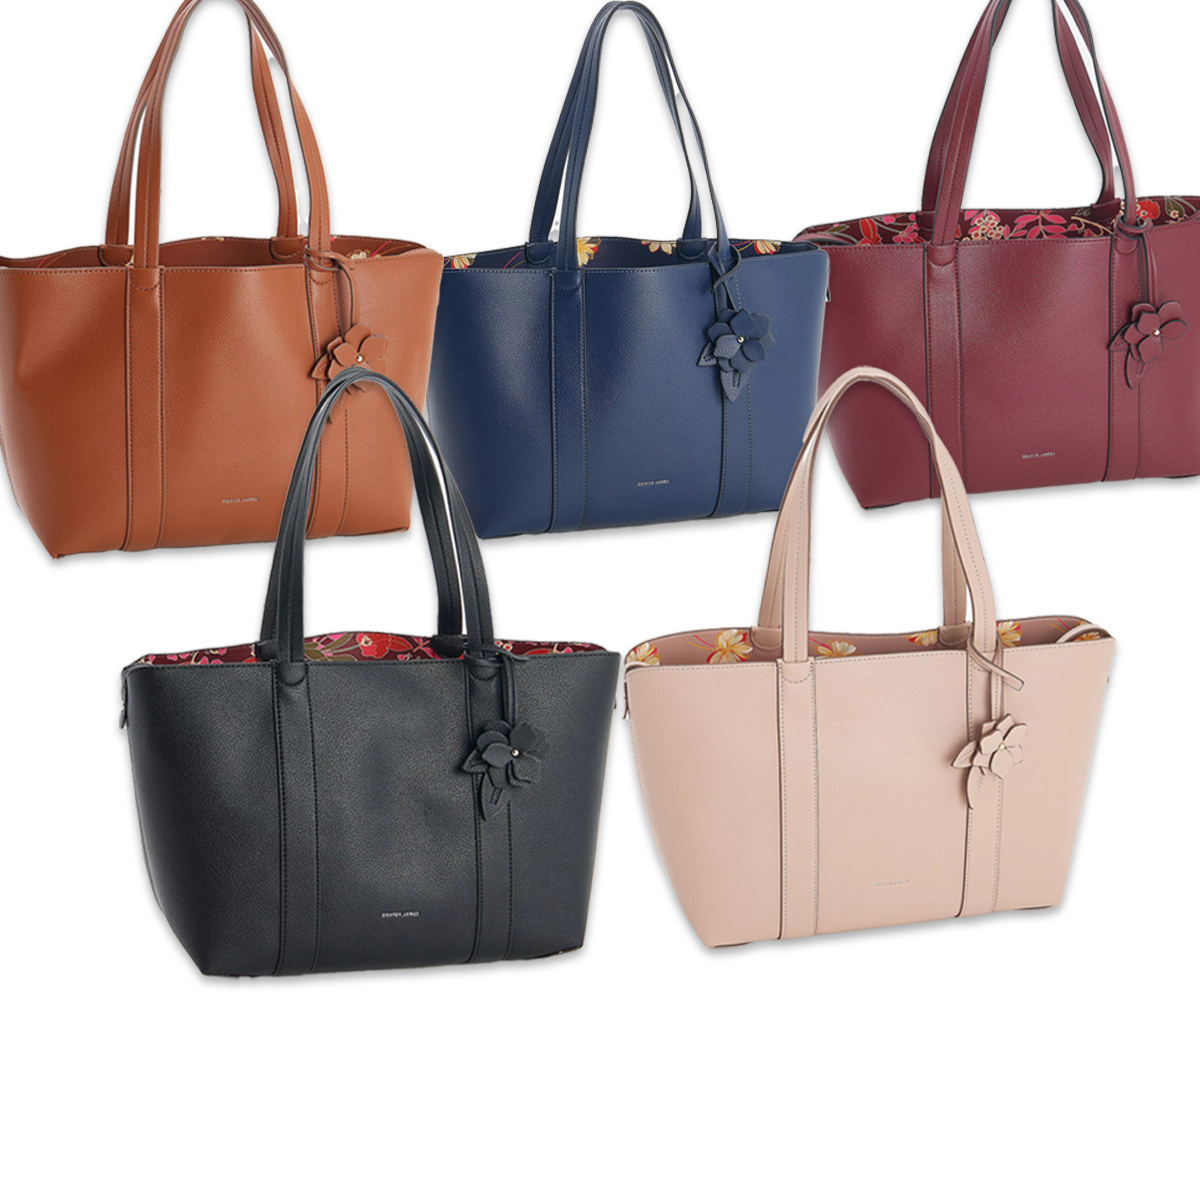 Buy leather tote bags for women at Reecee